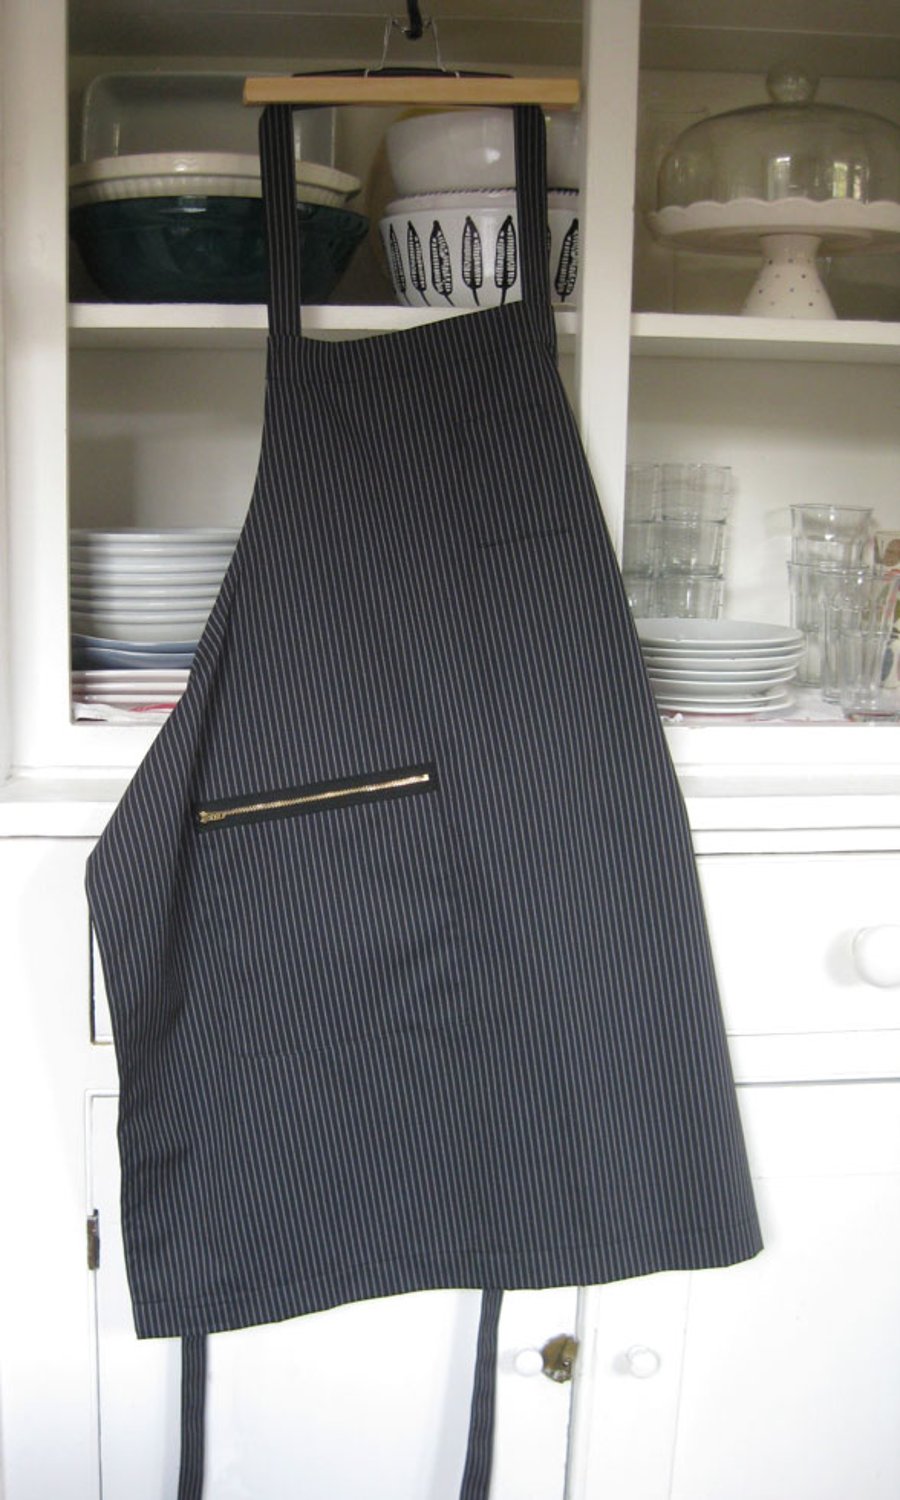 SAMPLE Pinstripe Mens Apron - barista style with secure zip pocket. No3 